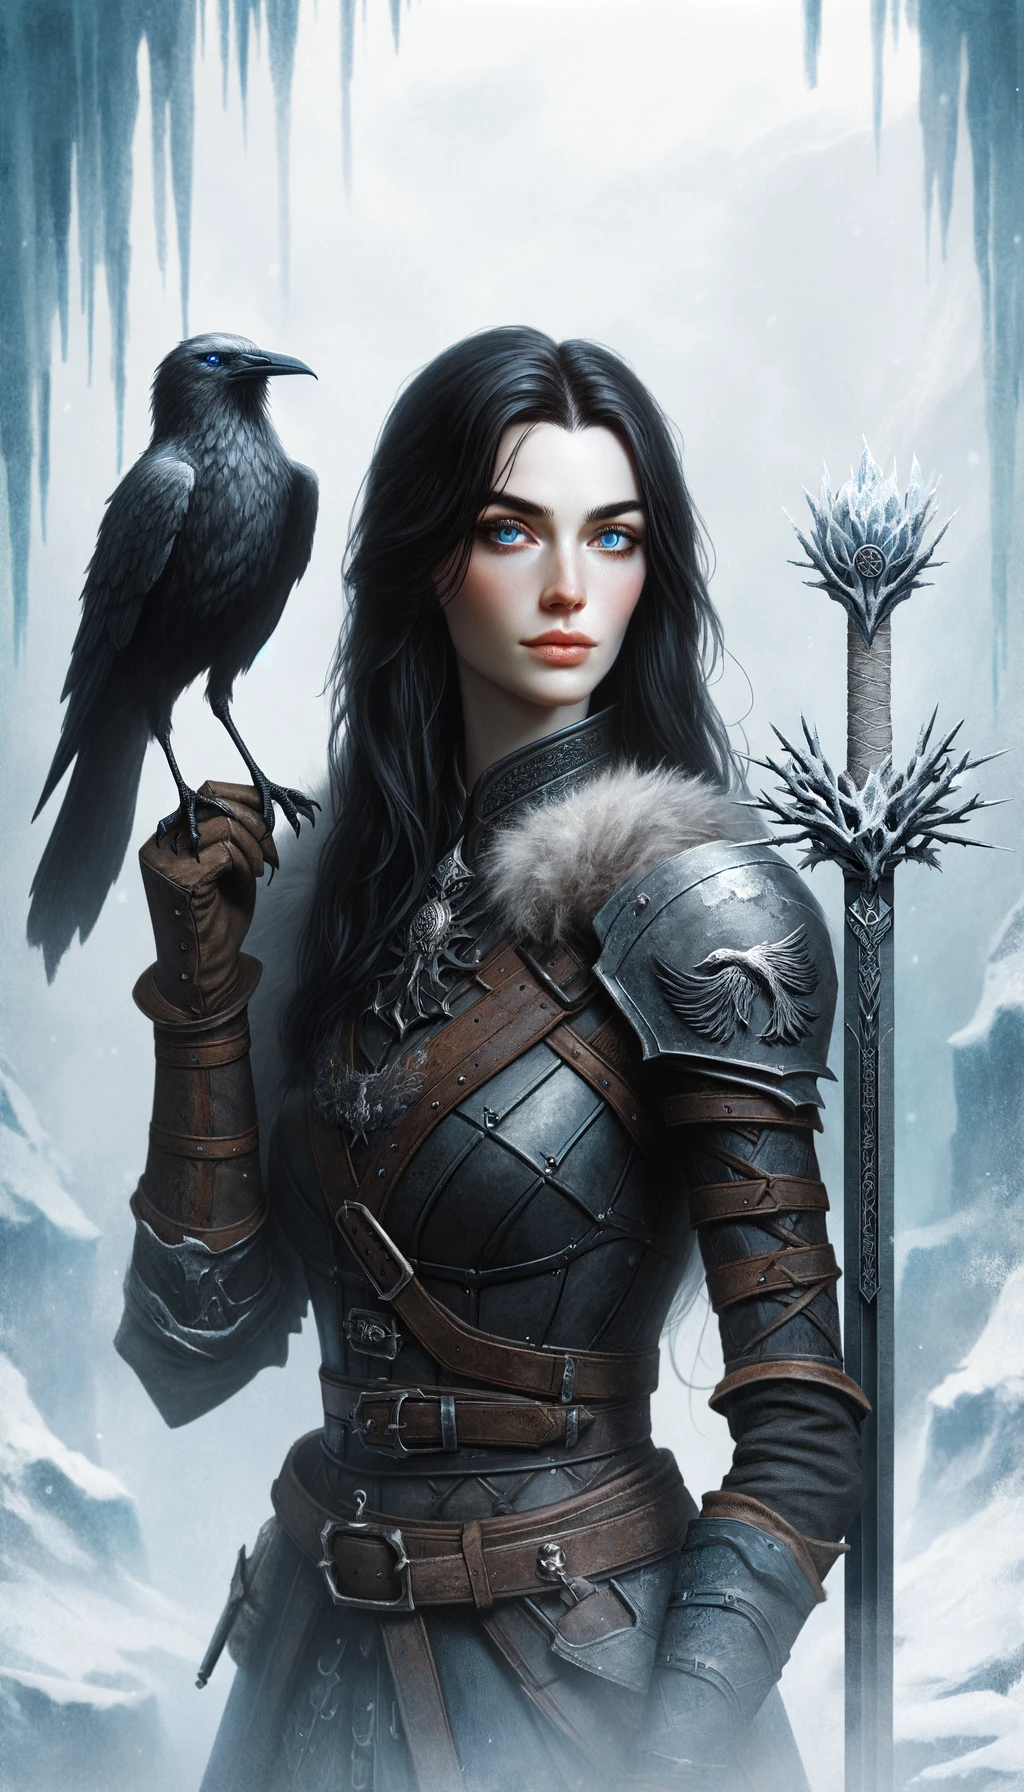 Eirlys Blackthorn: A New Fantasy Character Inspired by Game of Thrones - GoT fantasy characters.